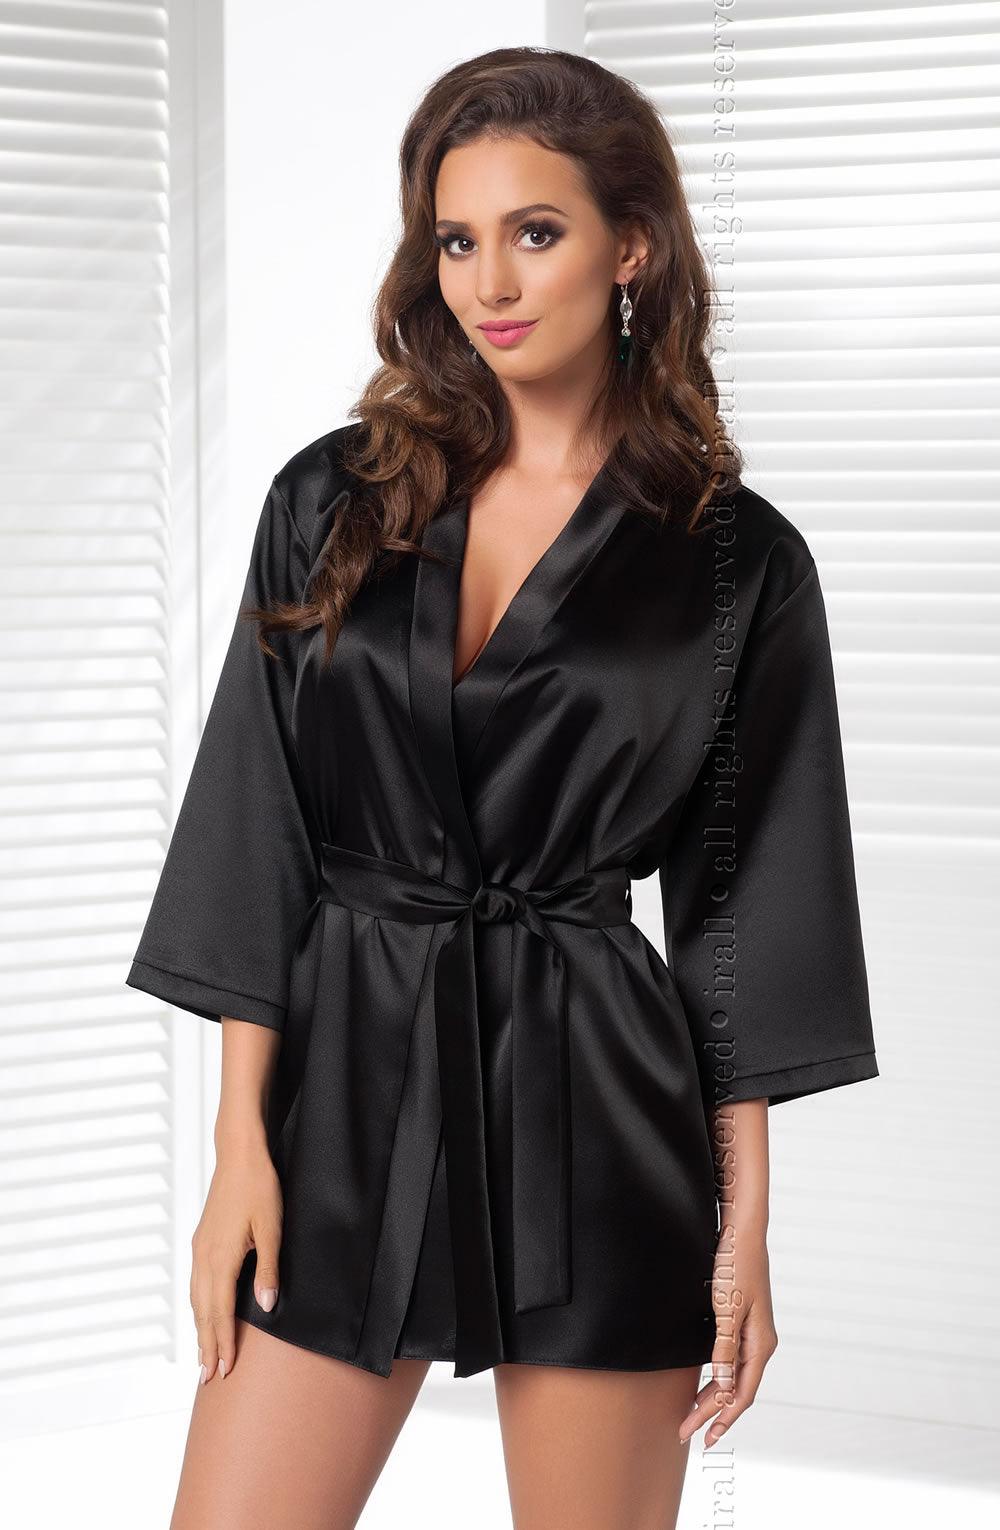 Irall Aria Dressing Gown Black - Sydney Rose Lingerie 